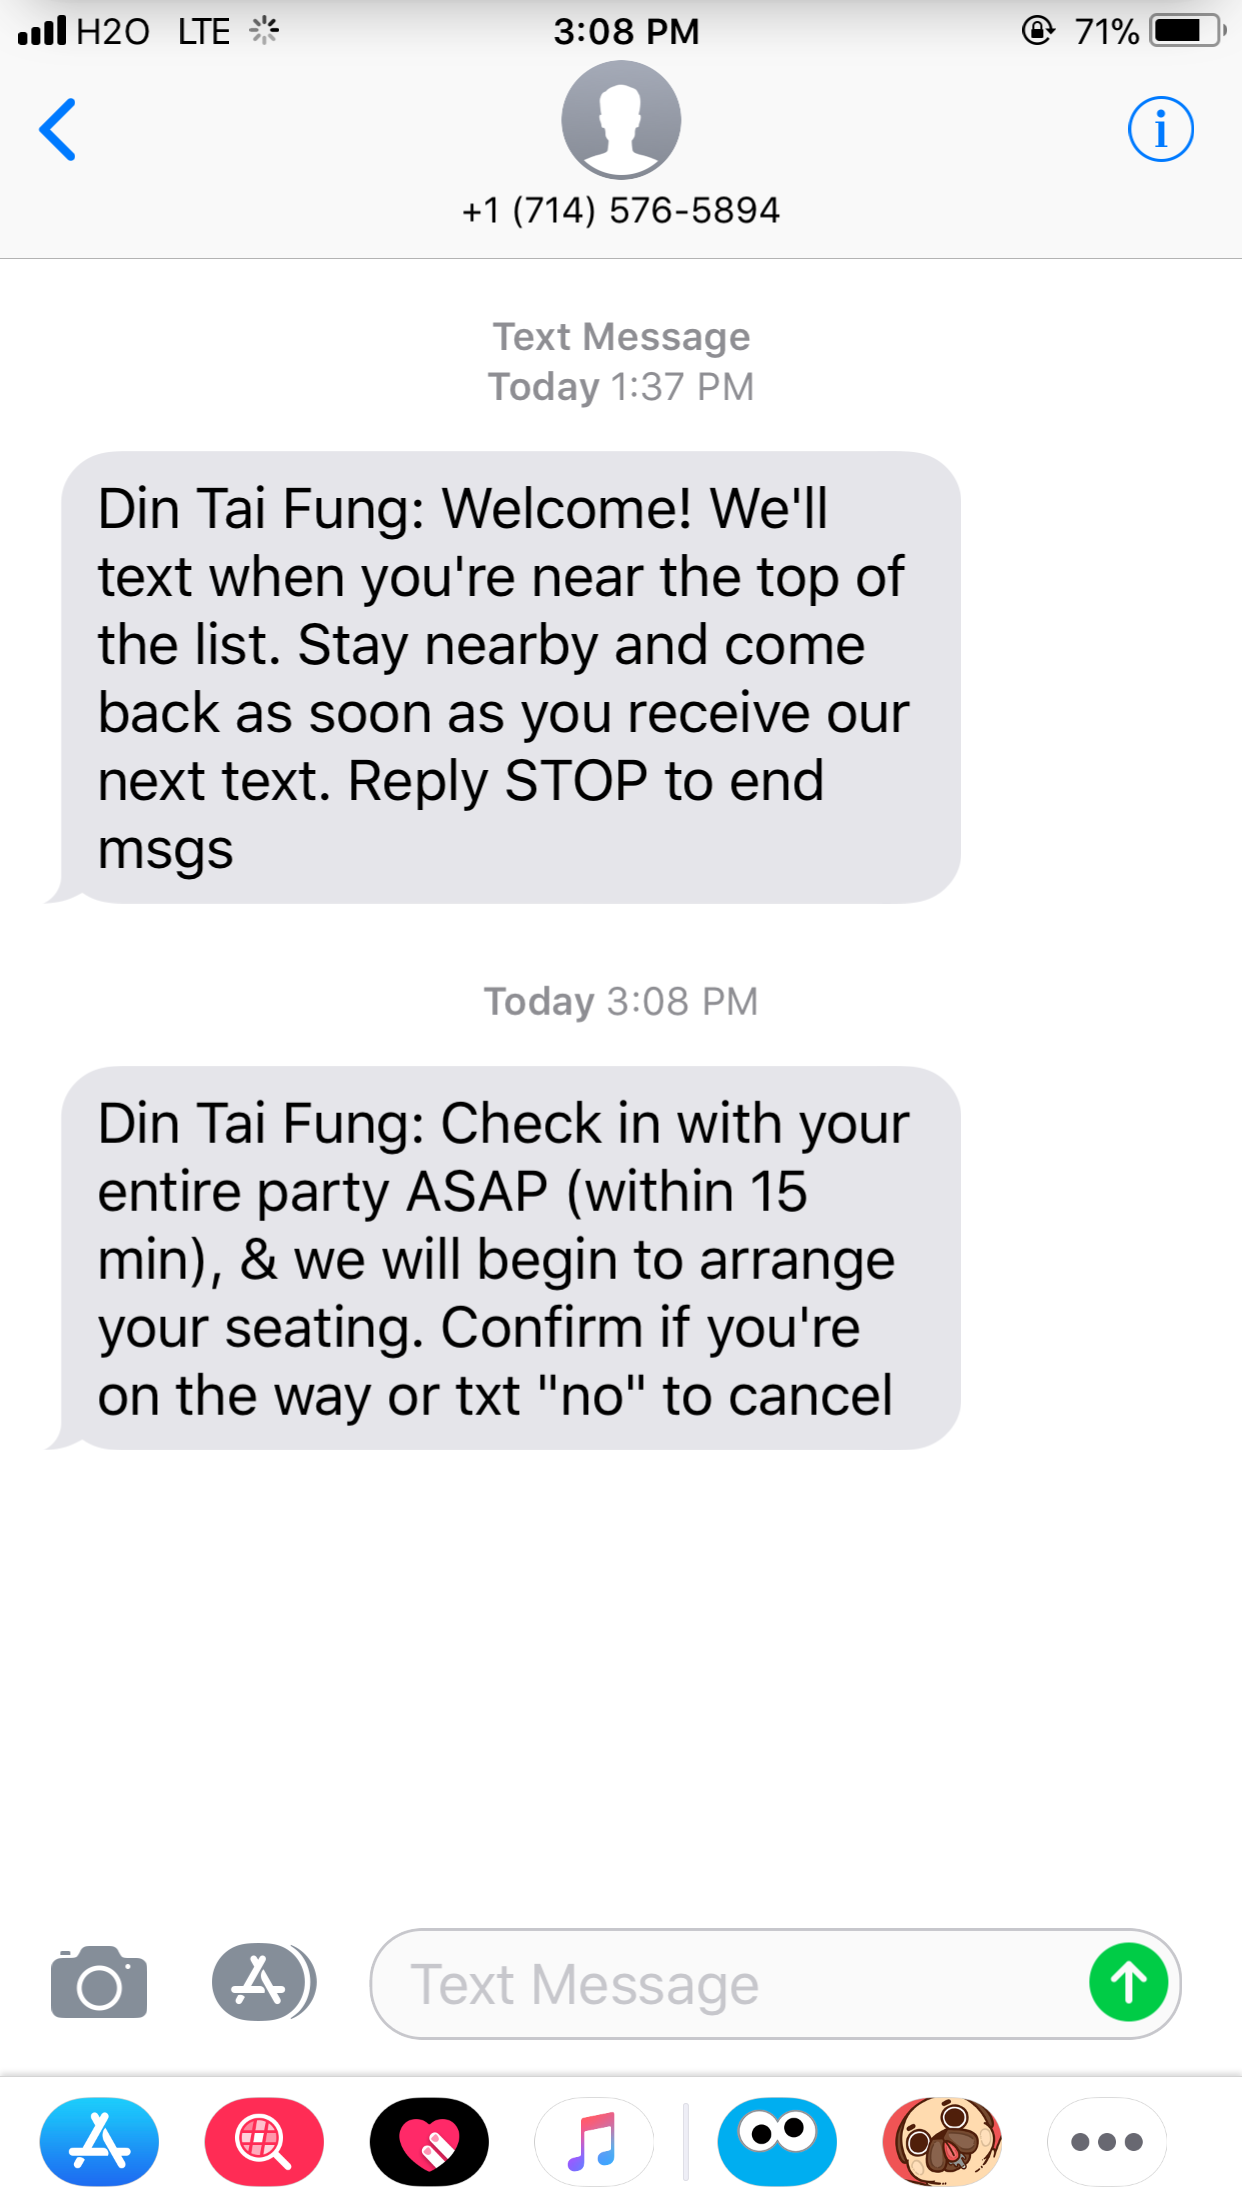 Din Tai Fung Case Study (Paper Prototype Reservation App), by Chia-Ming  (April) Wu